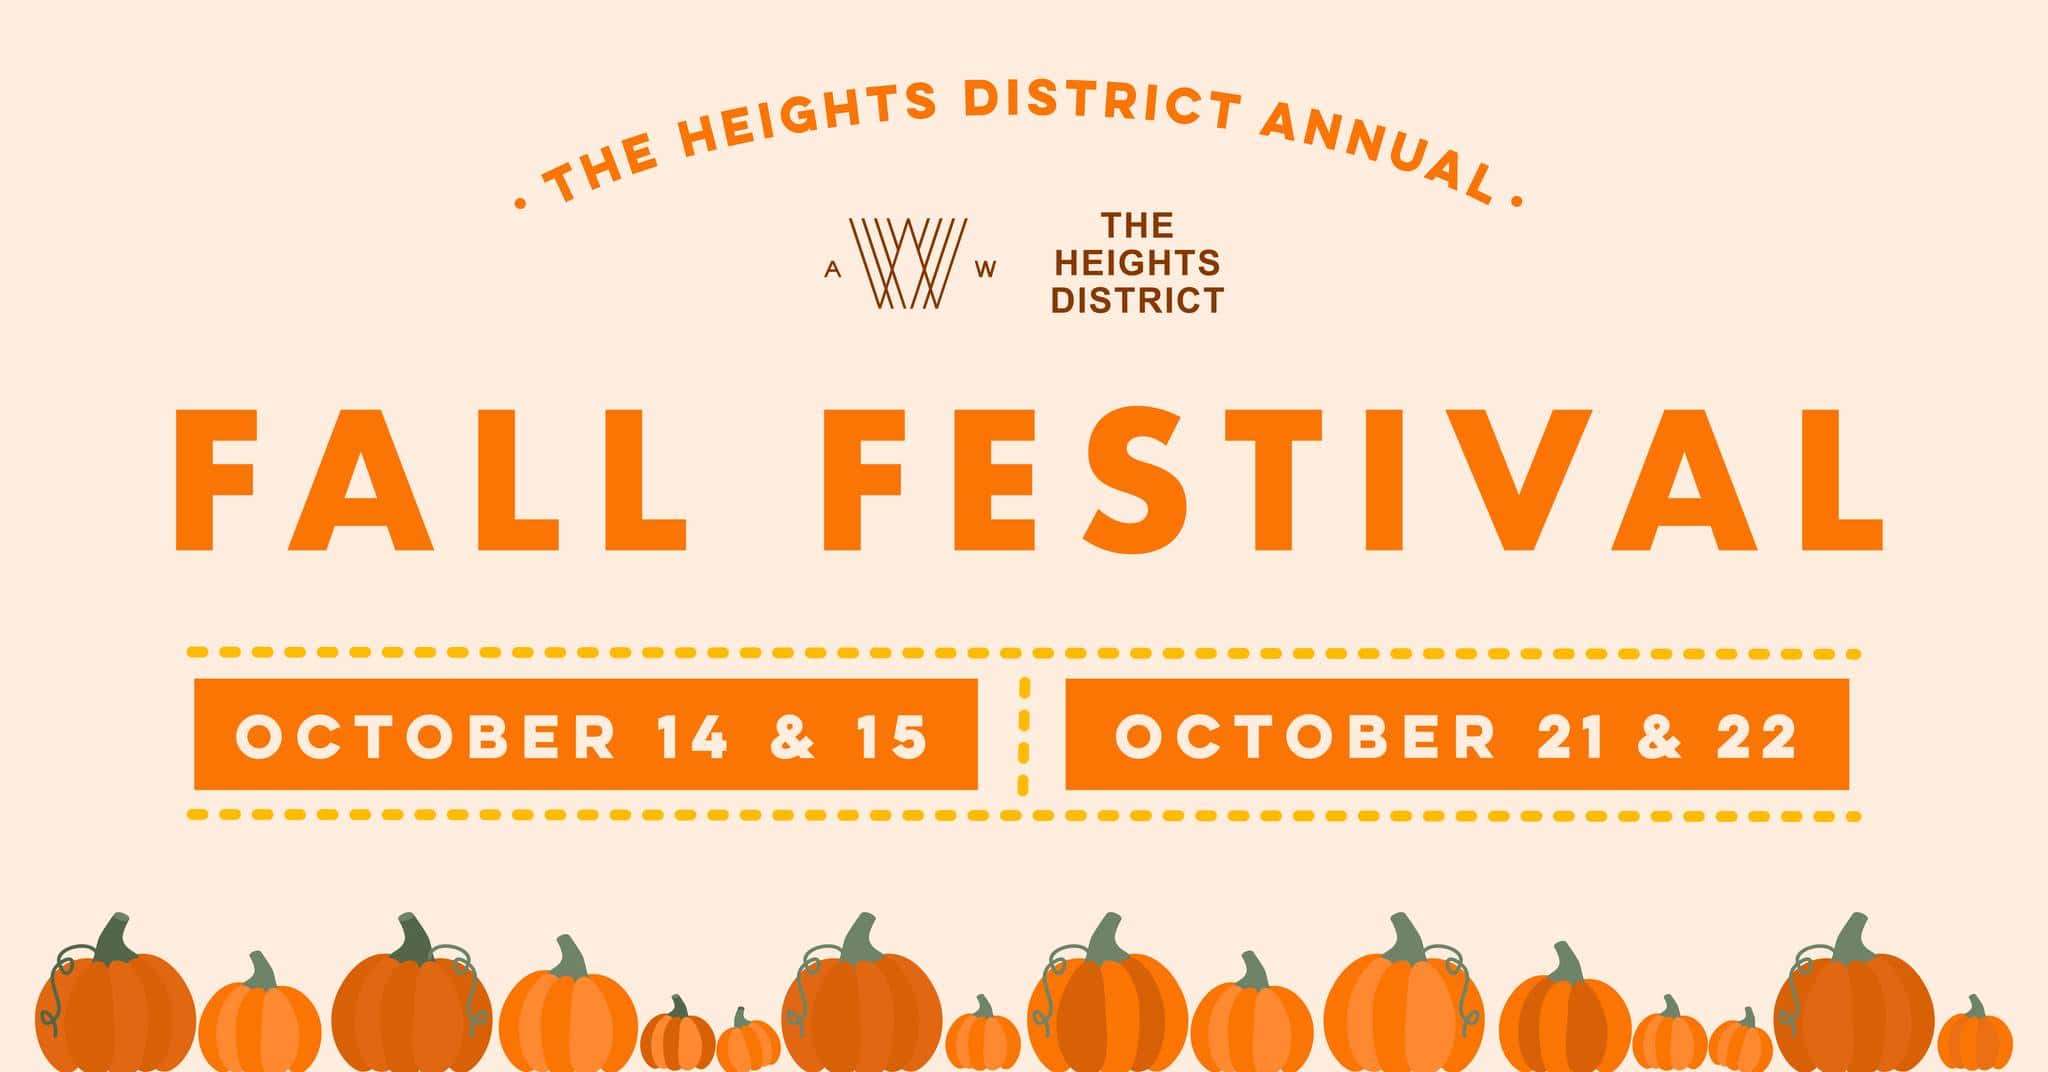 Heights District Fall Festival at Armature Works